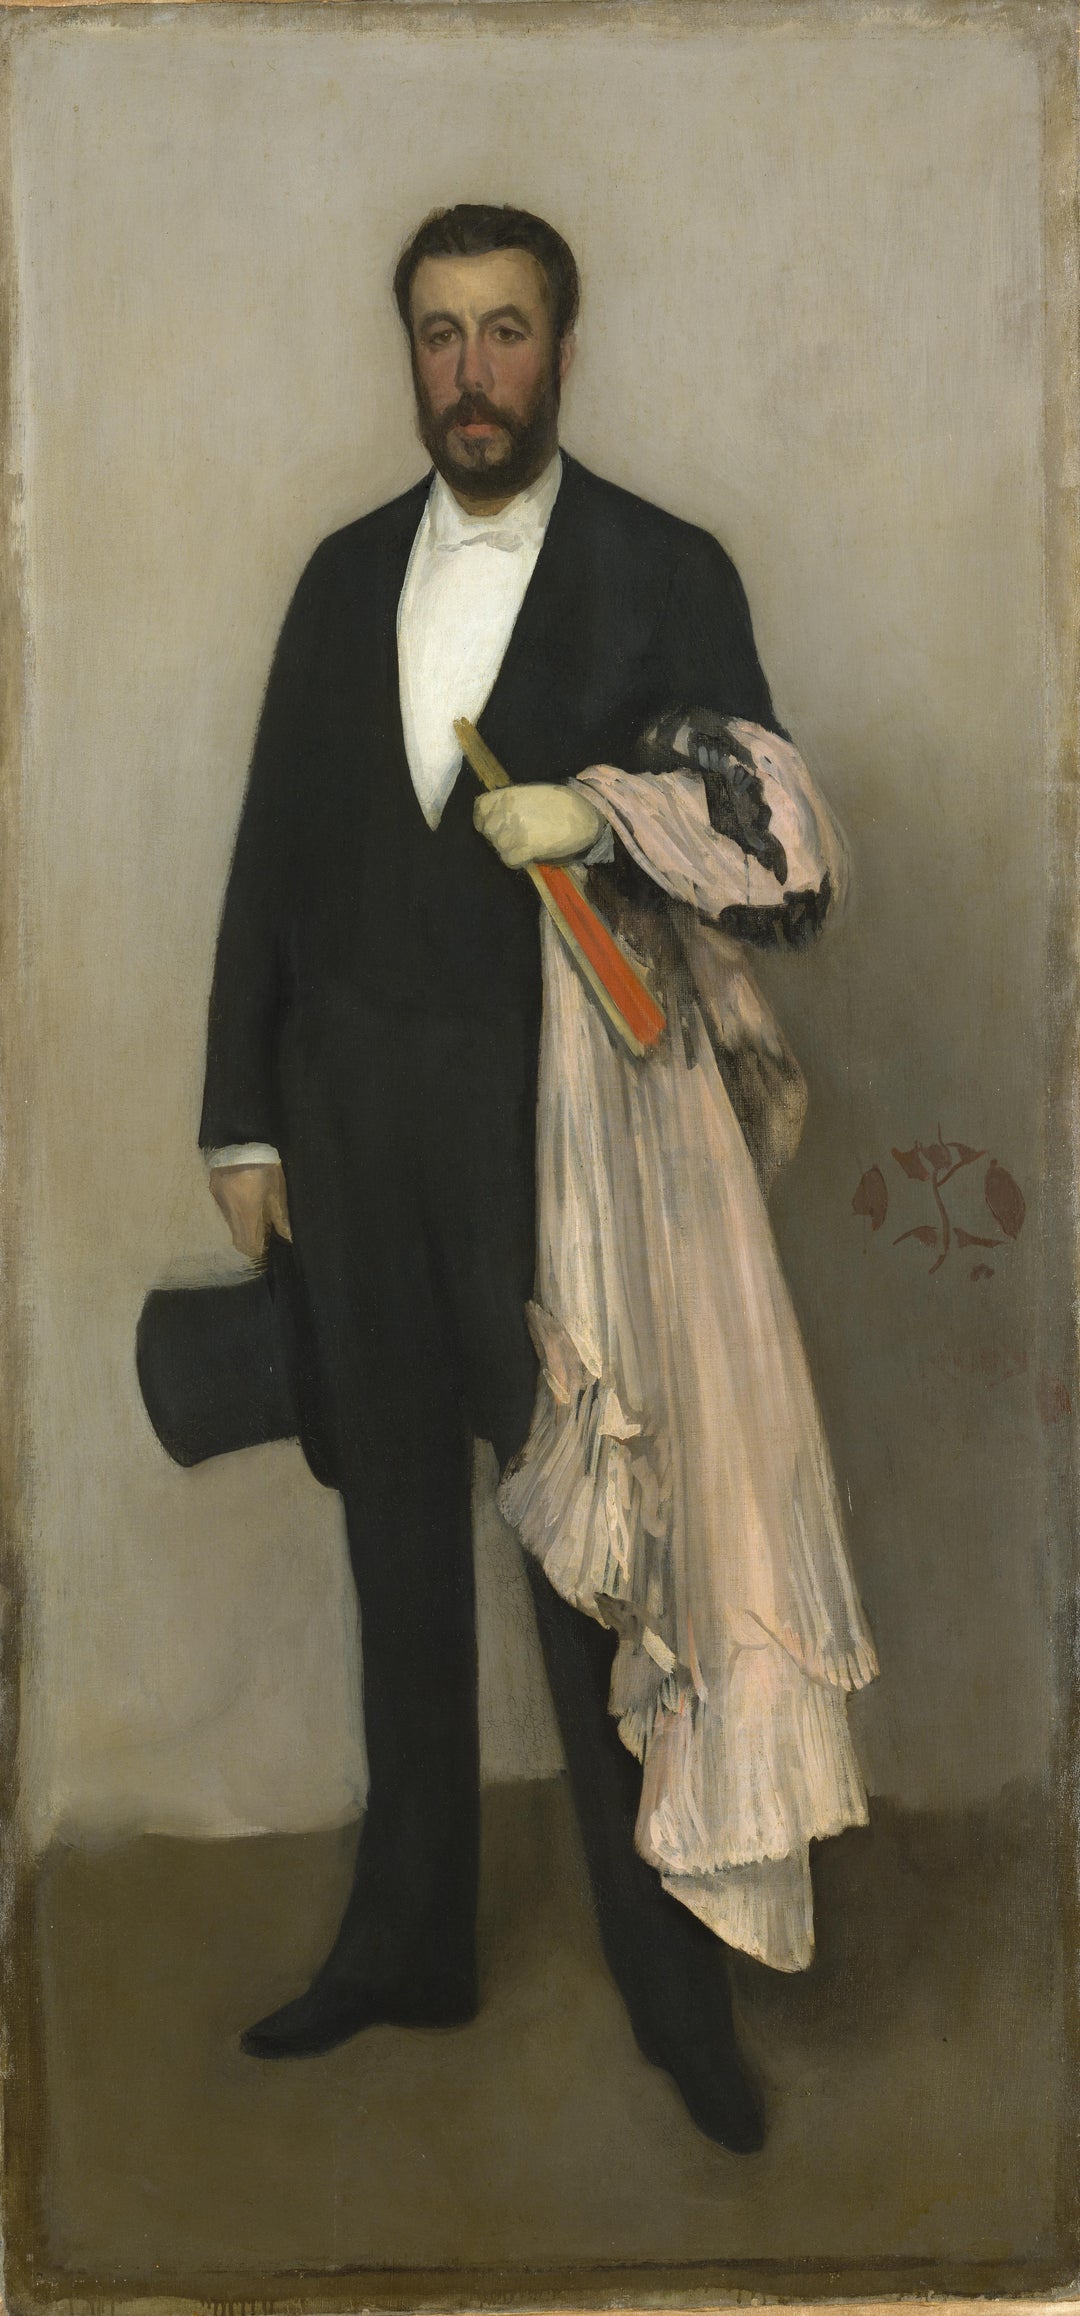 Arrangement in Flesh Colour and Black: Portrait of Theodore Duret by James Abbott McNeill Whistler Reproduction Painting by Blue Surf Art